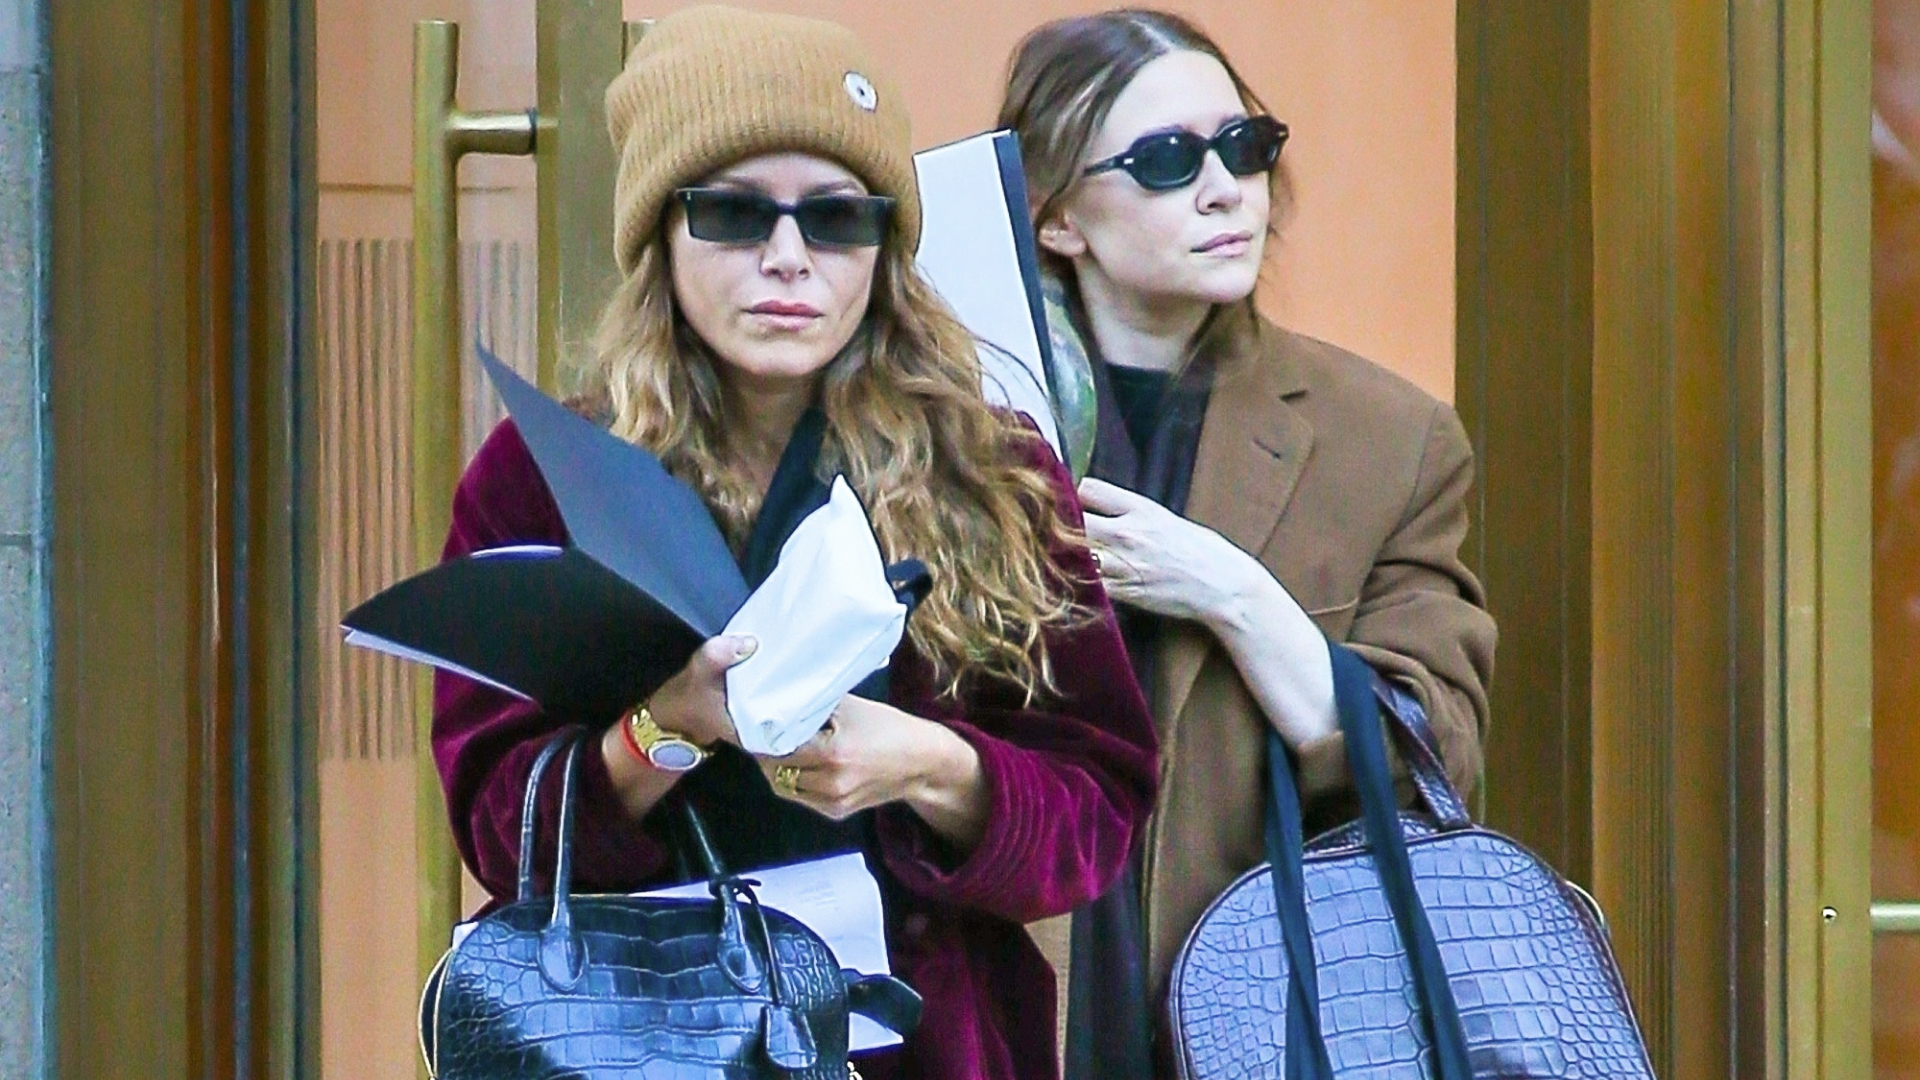 THE OLSEN TWINS, THEIR STYLE, HANDBAGS & EVOLUTION/ From 2000s Boho To  Their Luxury Minimalism Line - YouTube